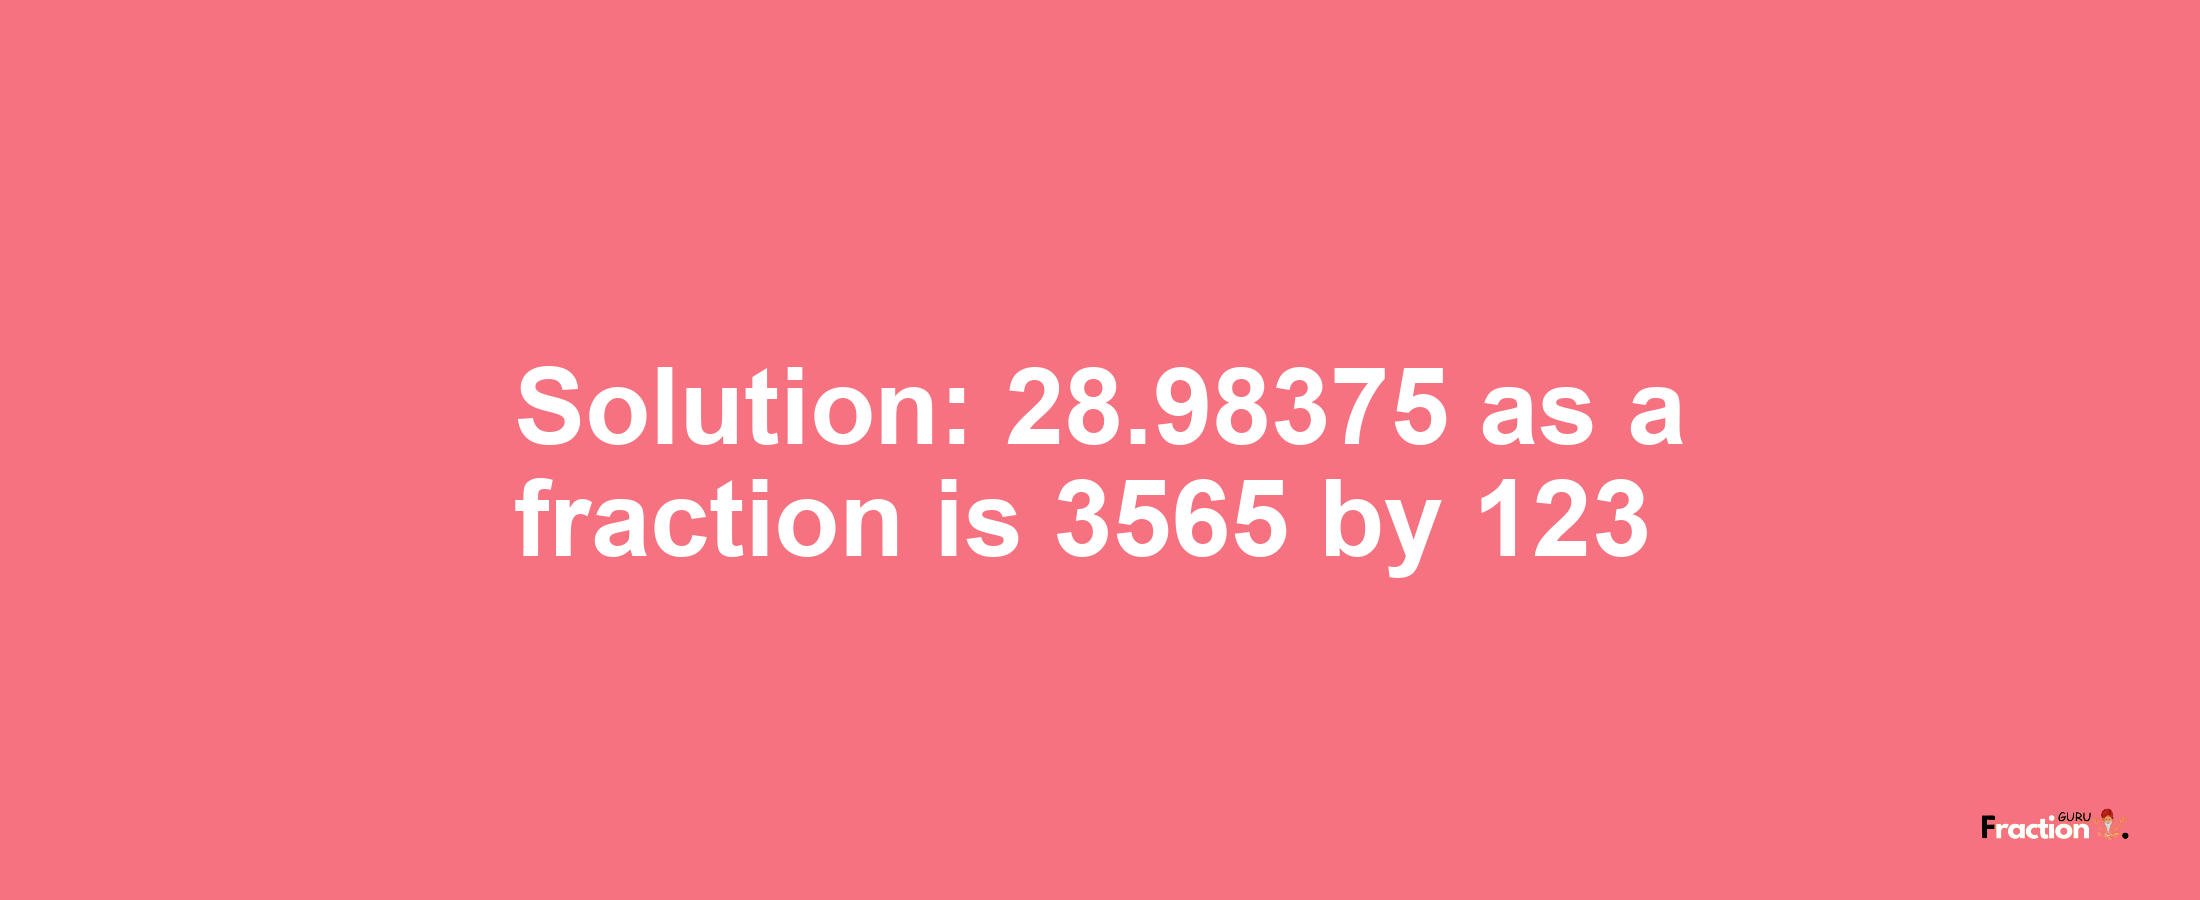 Solution:28.98375 as a fraction is 3565/123